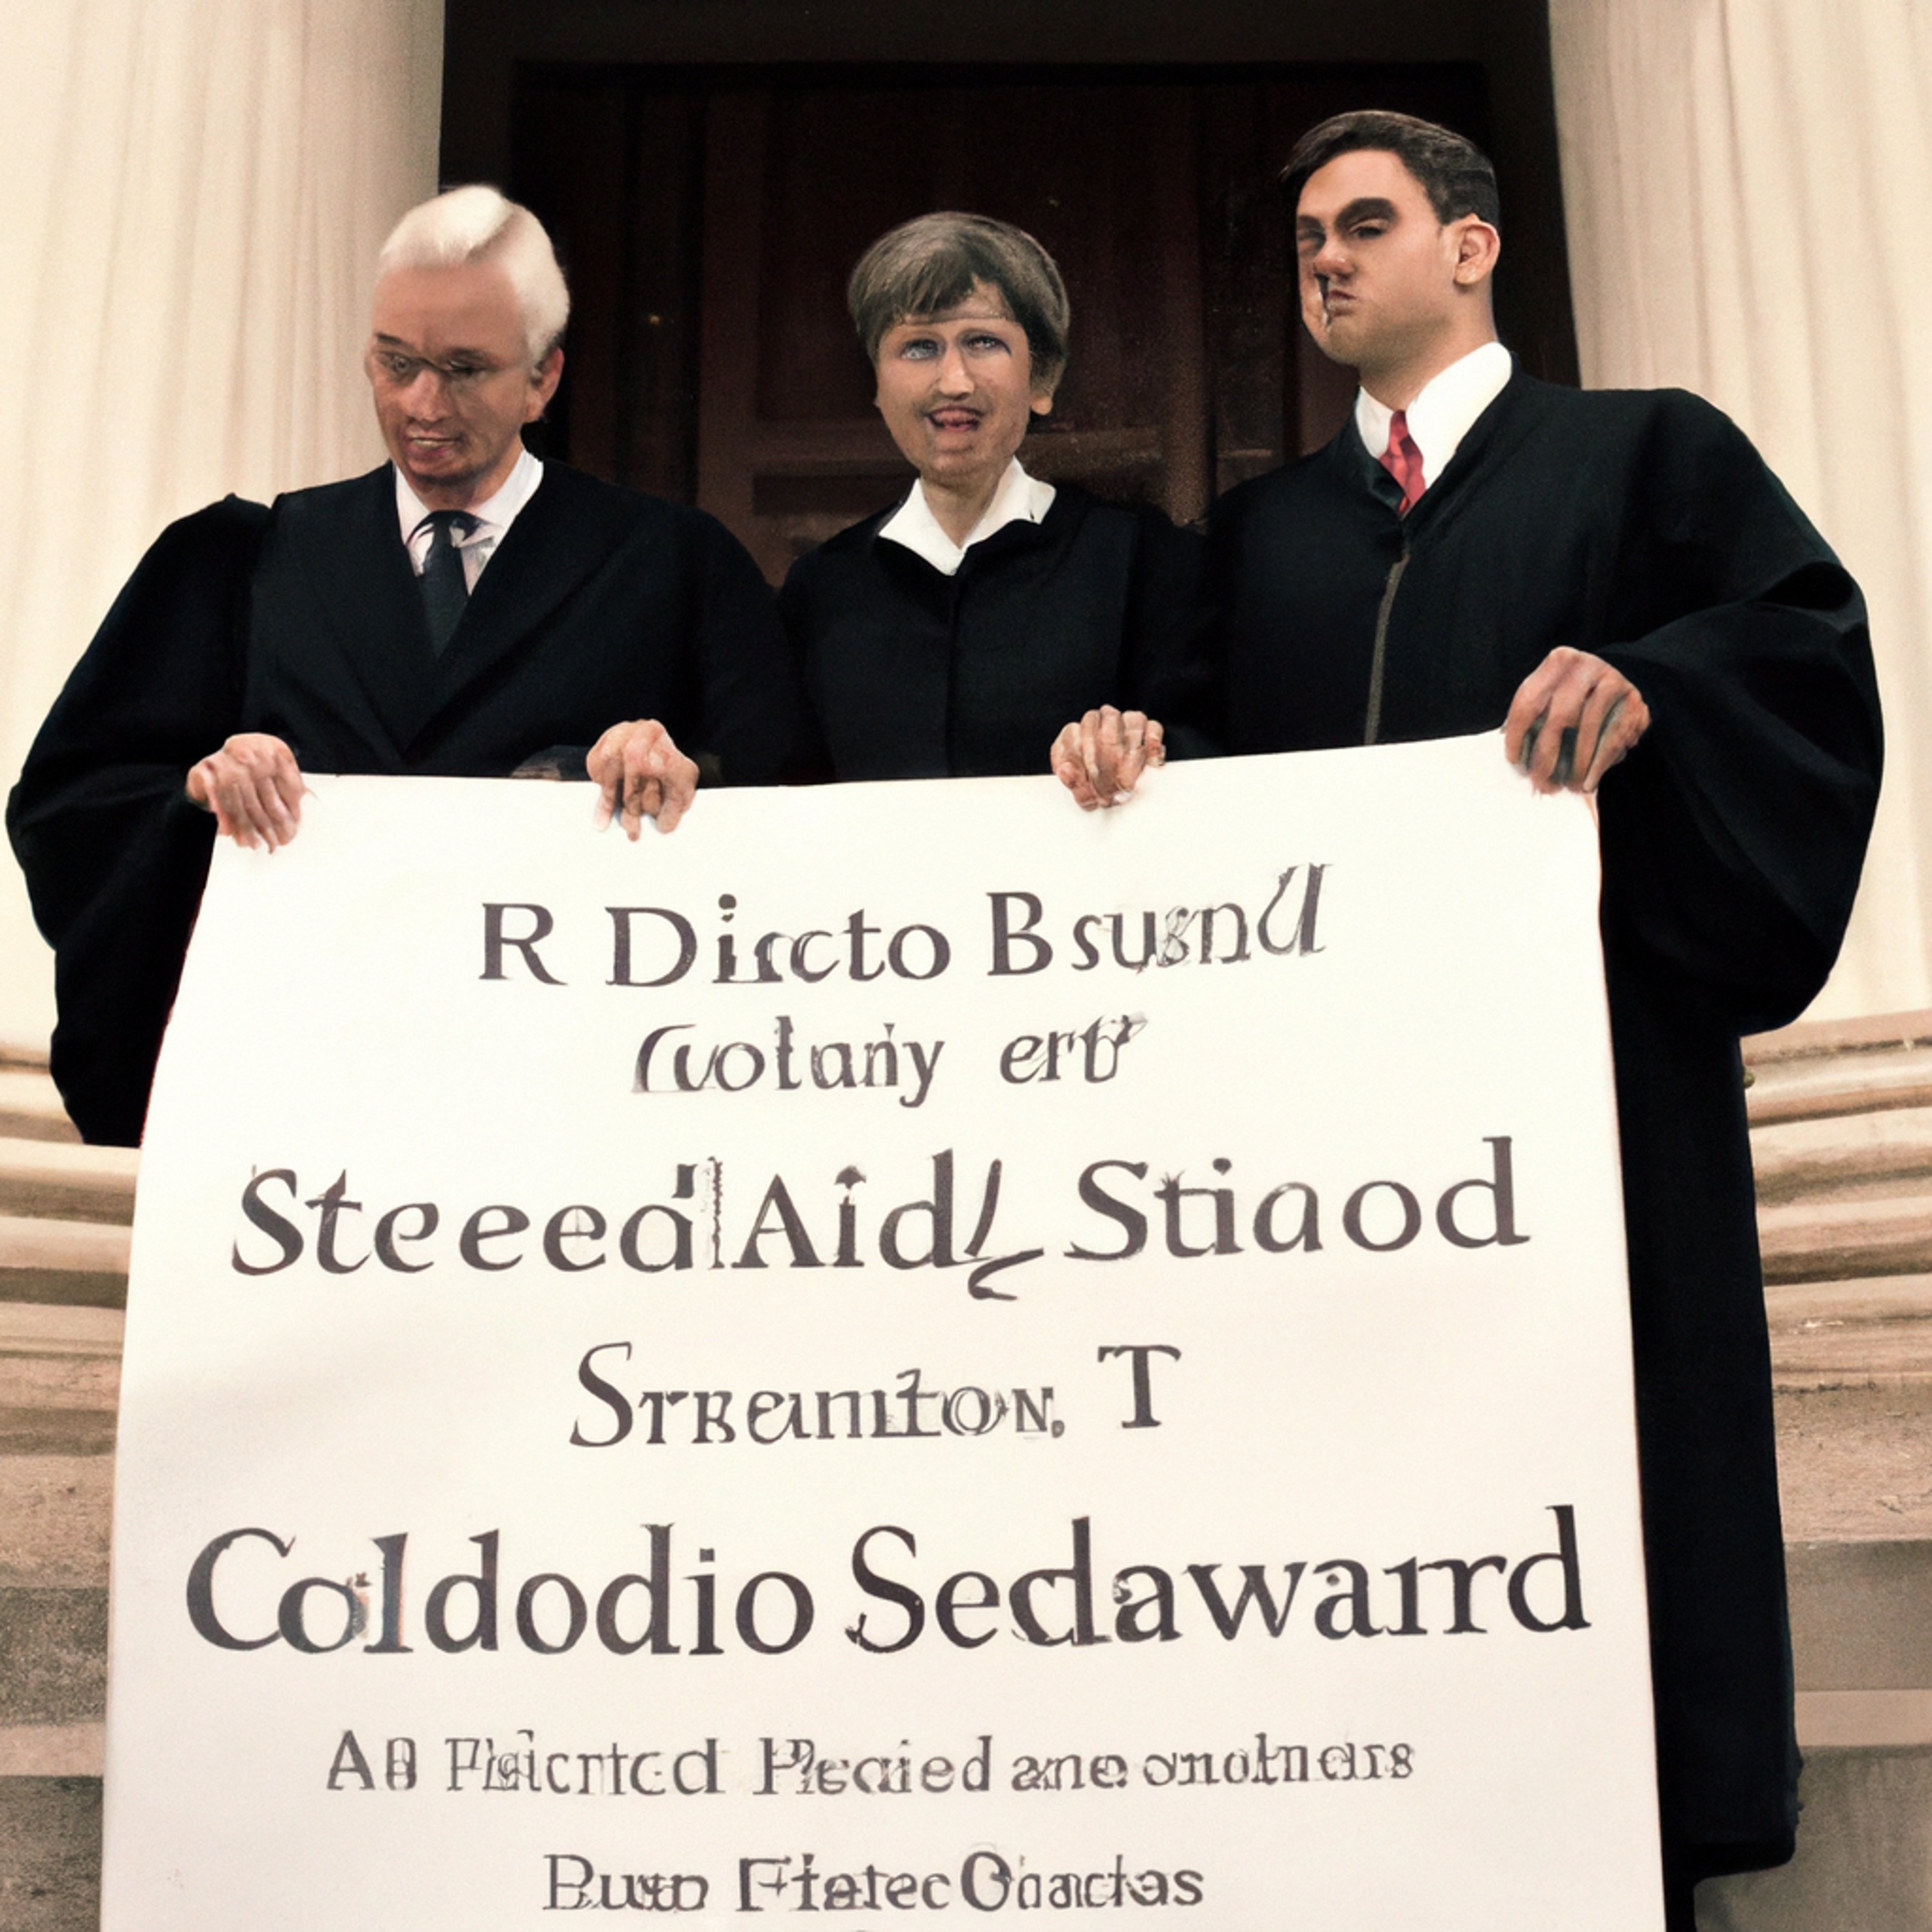 Federal Judges Announce Boycott of Stanford Law School Over Mistreatment of Fellow Judge